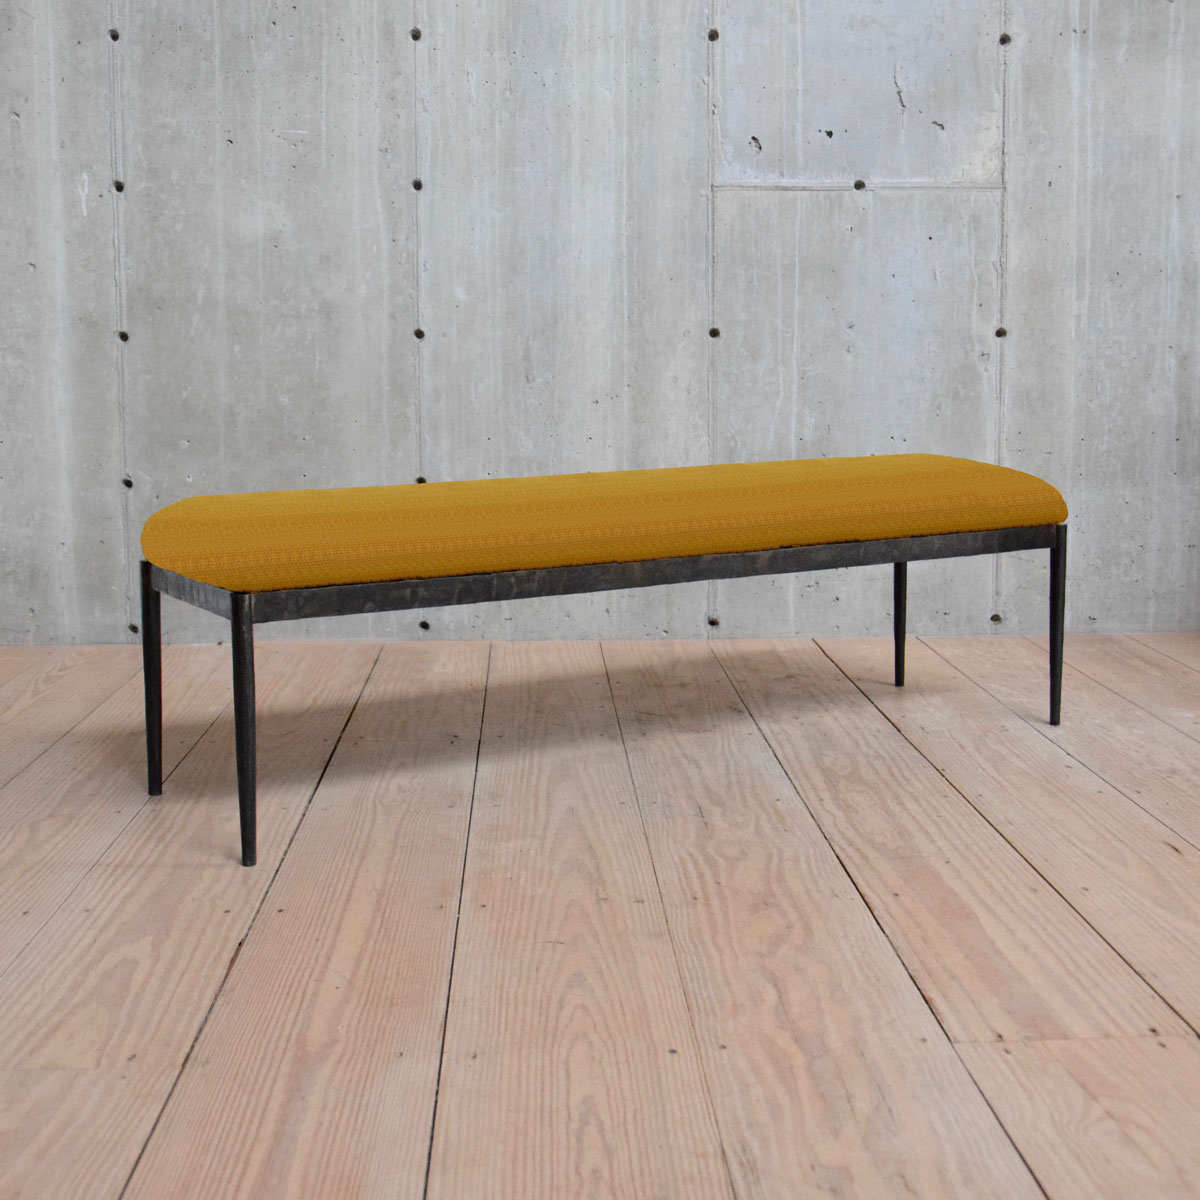 Monaco Style Bench with Upholstered Seat $4,485